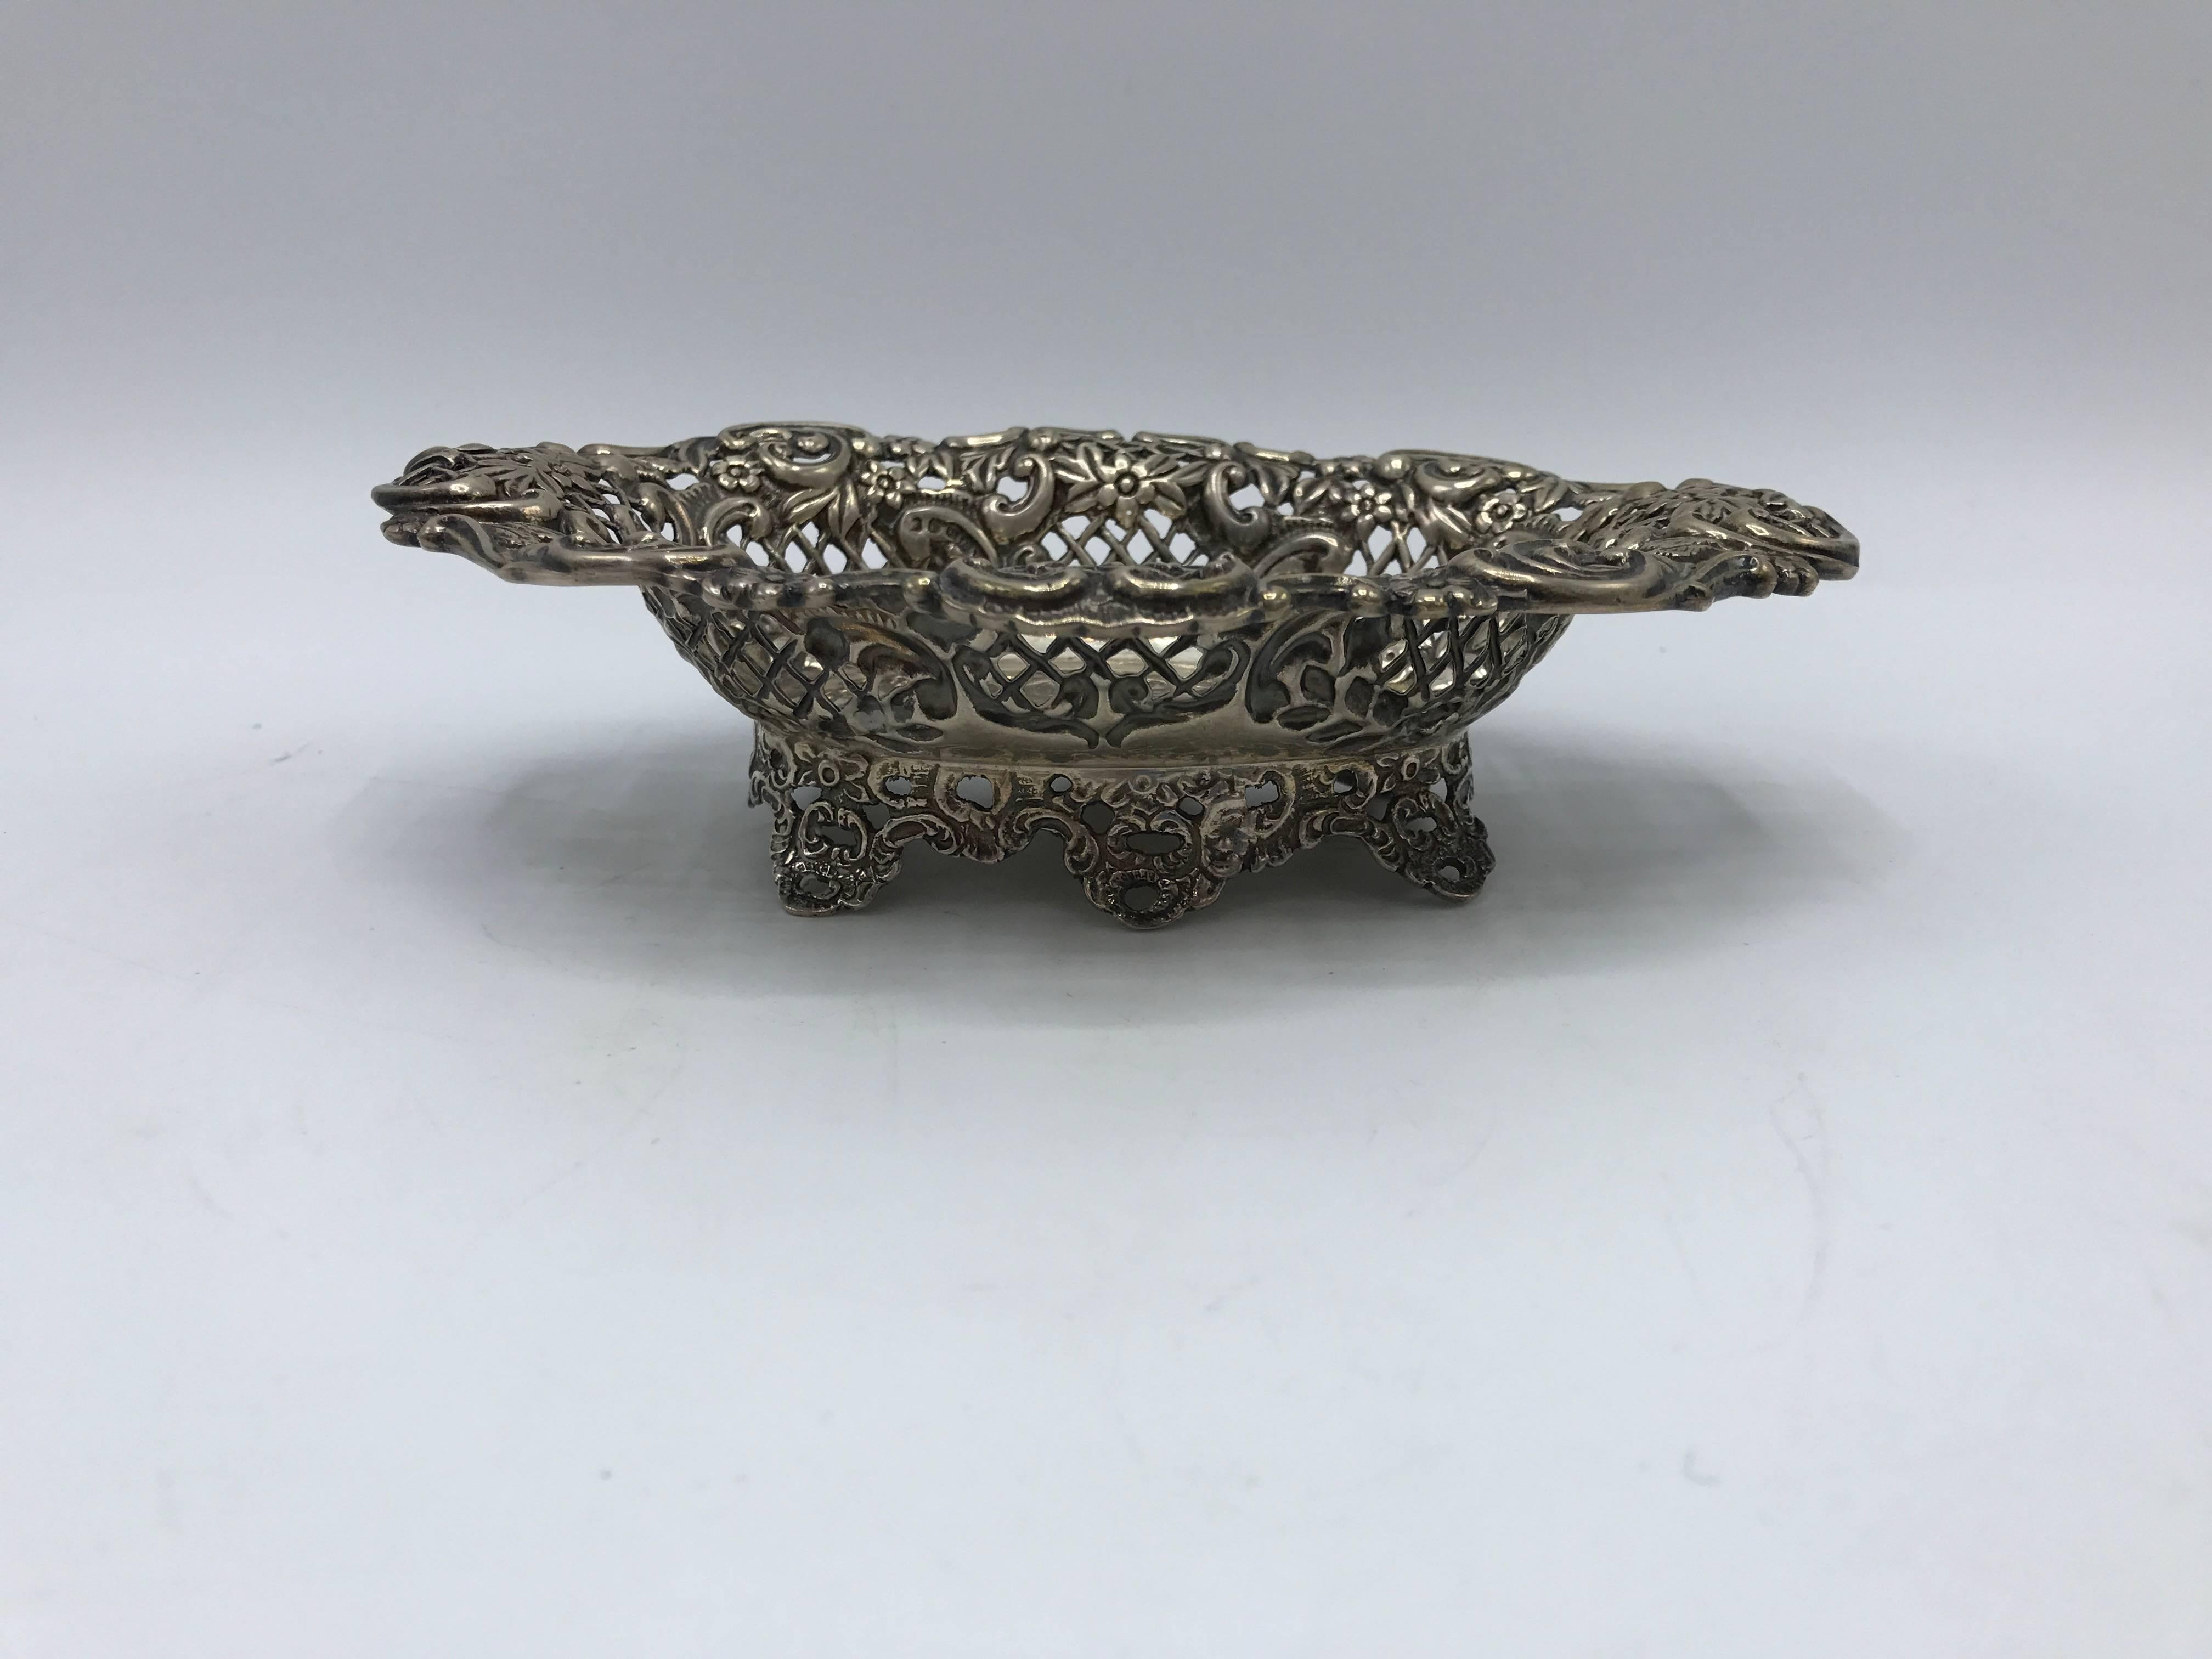 Offered is a stunning, 19th century English sterling silver pierced dish. Immaculate detailing.